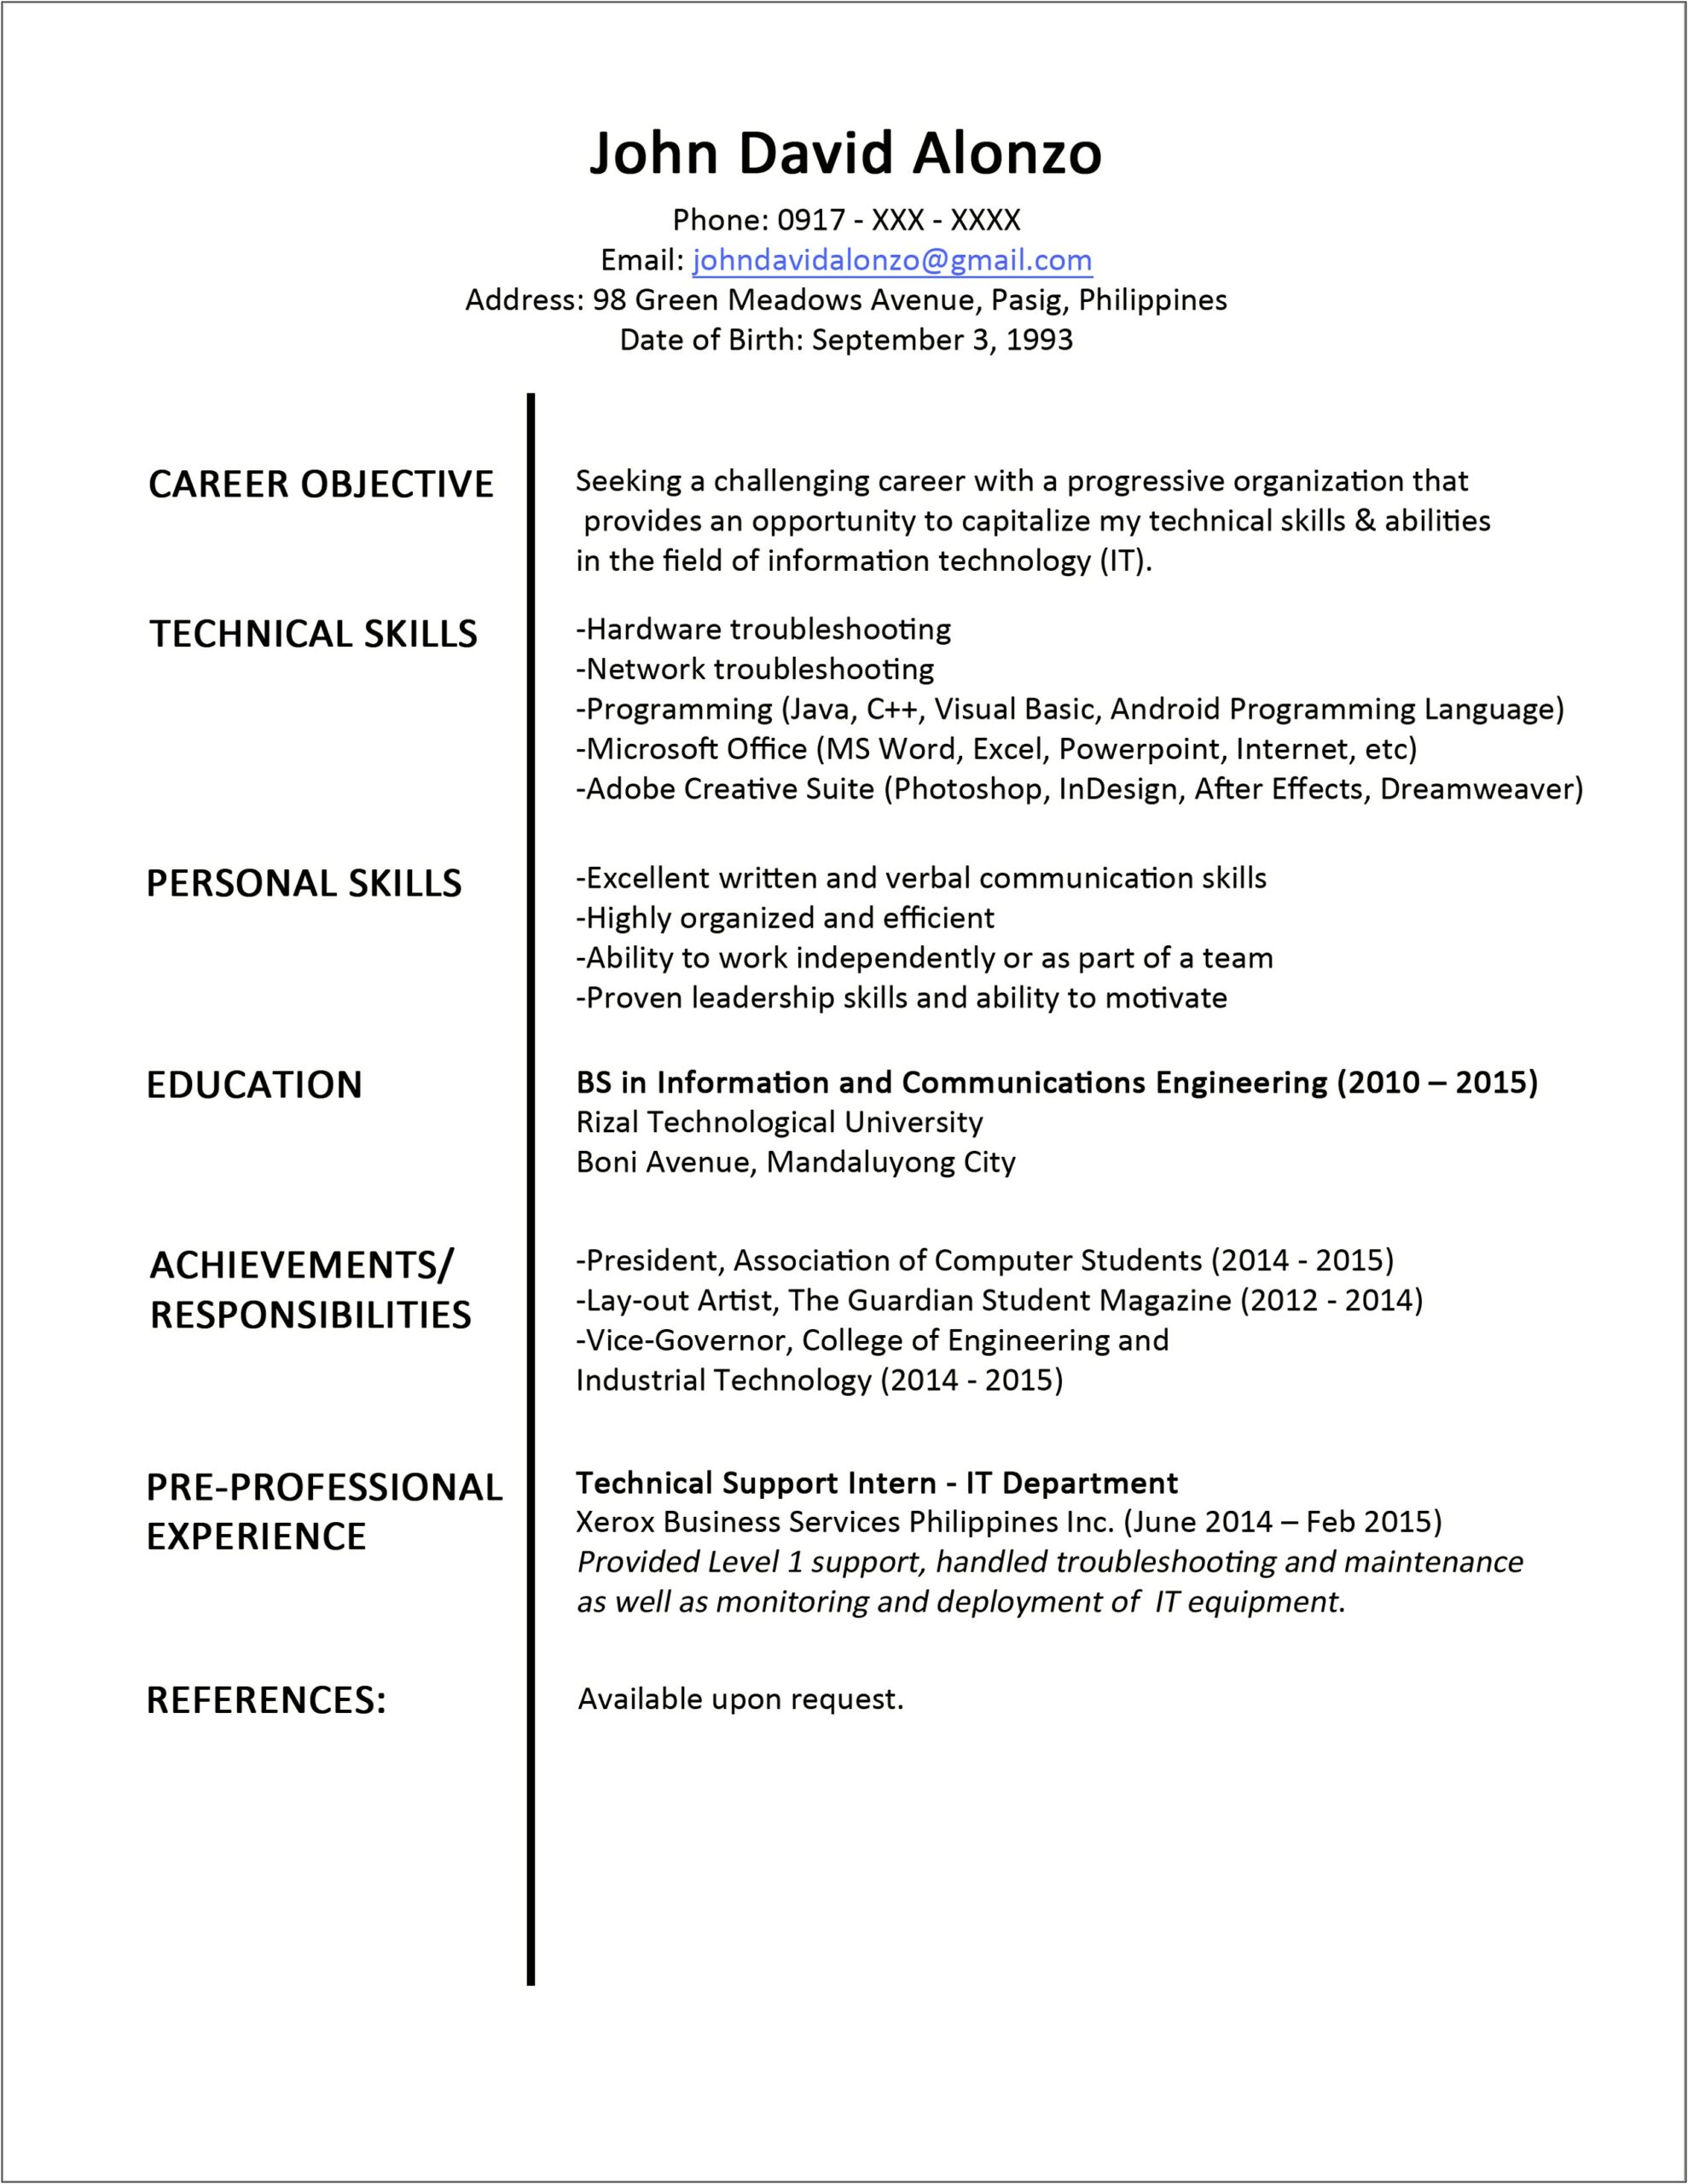 Resume Profile Examples College Student